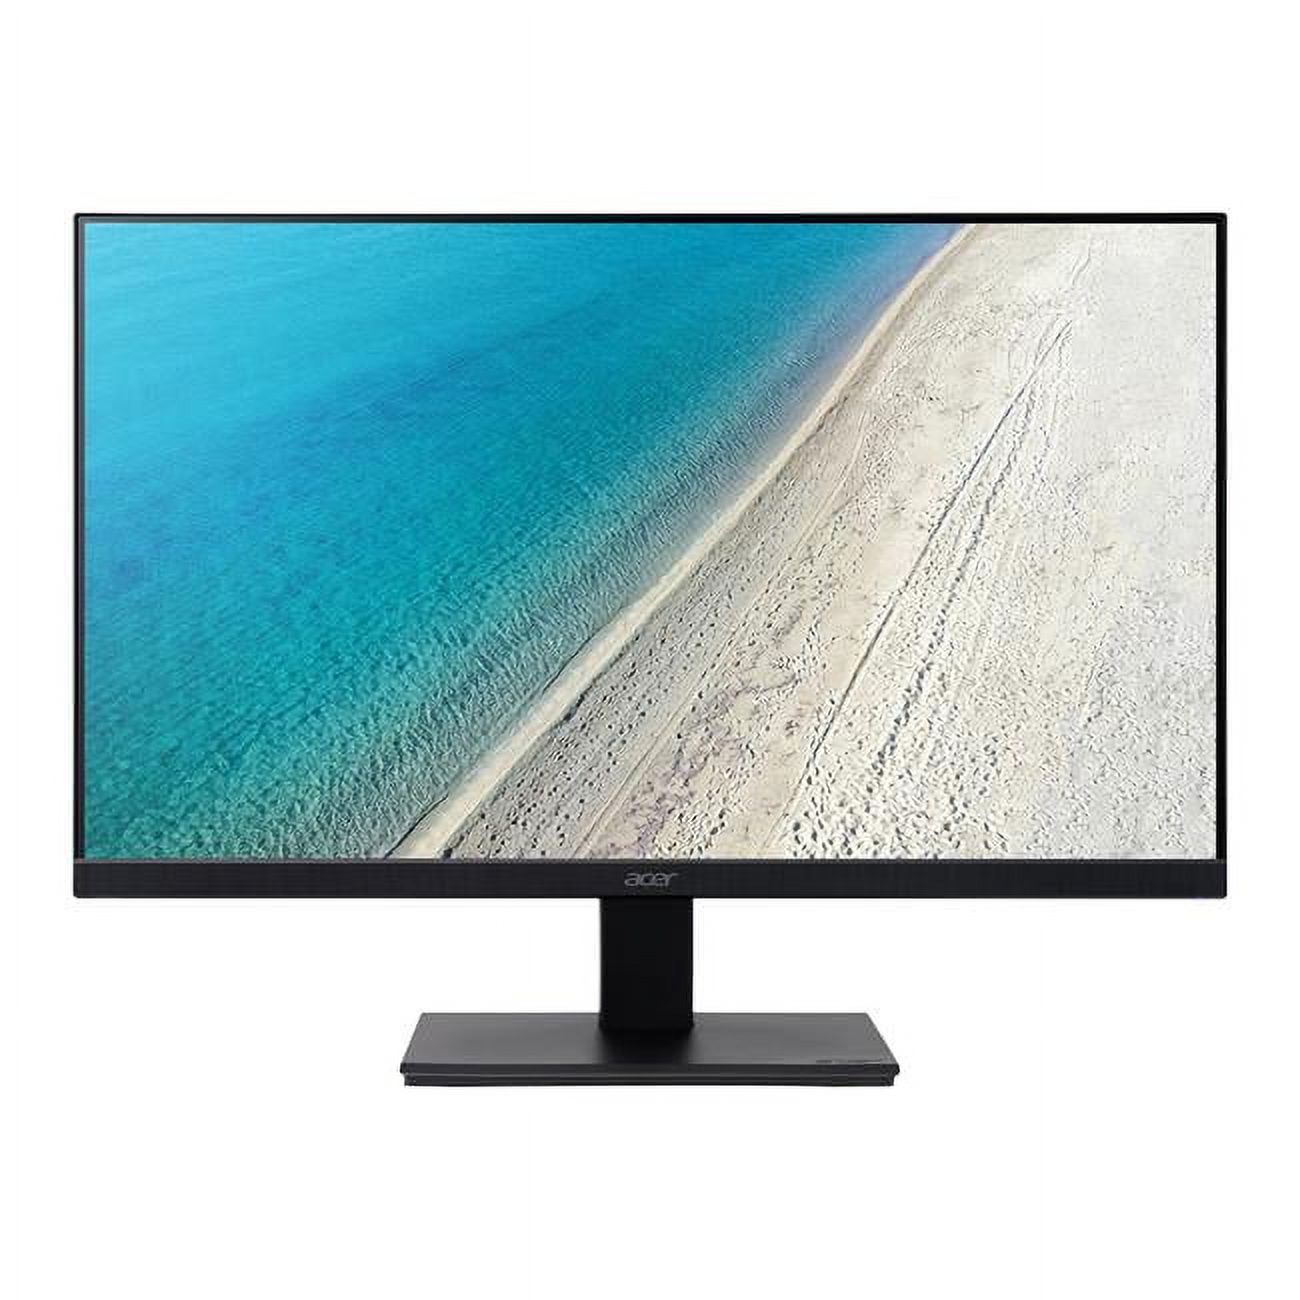 Acer V247Y A Full HD LCD Monitor, 16:9, Black - image 1 of 7